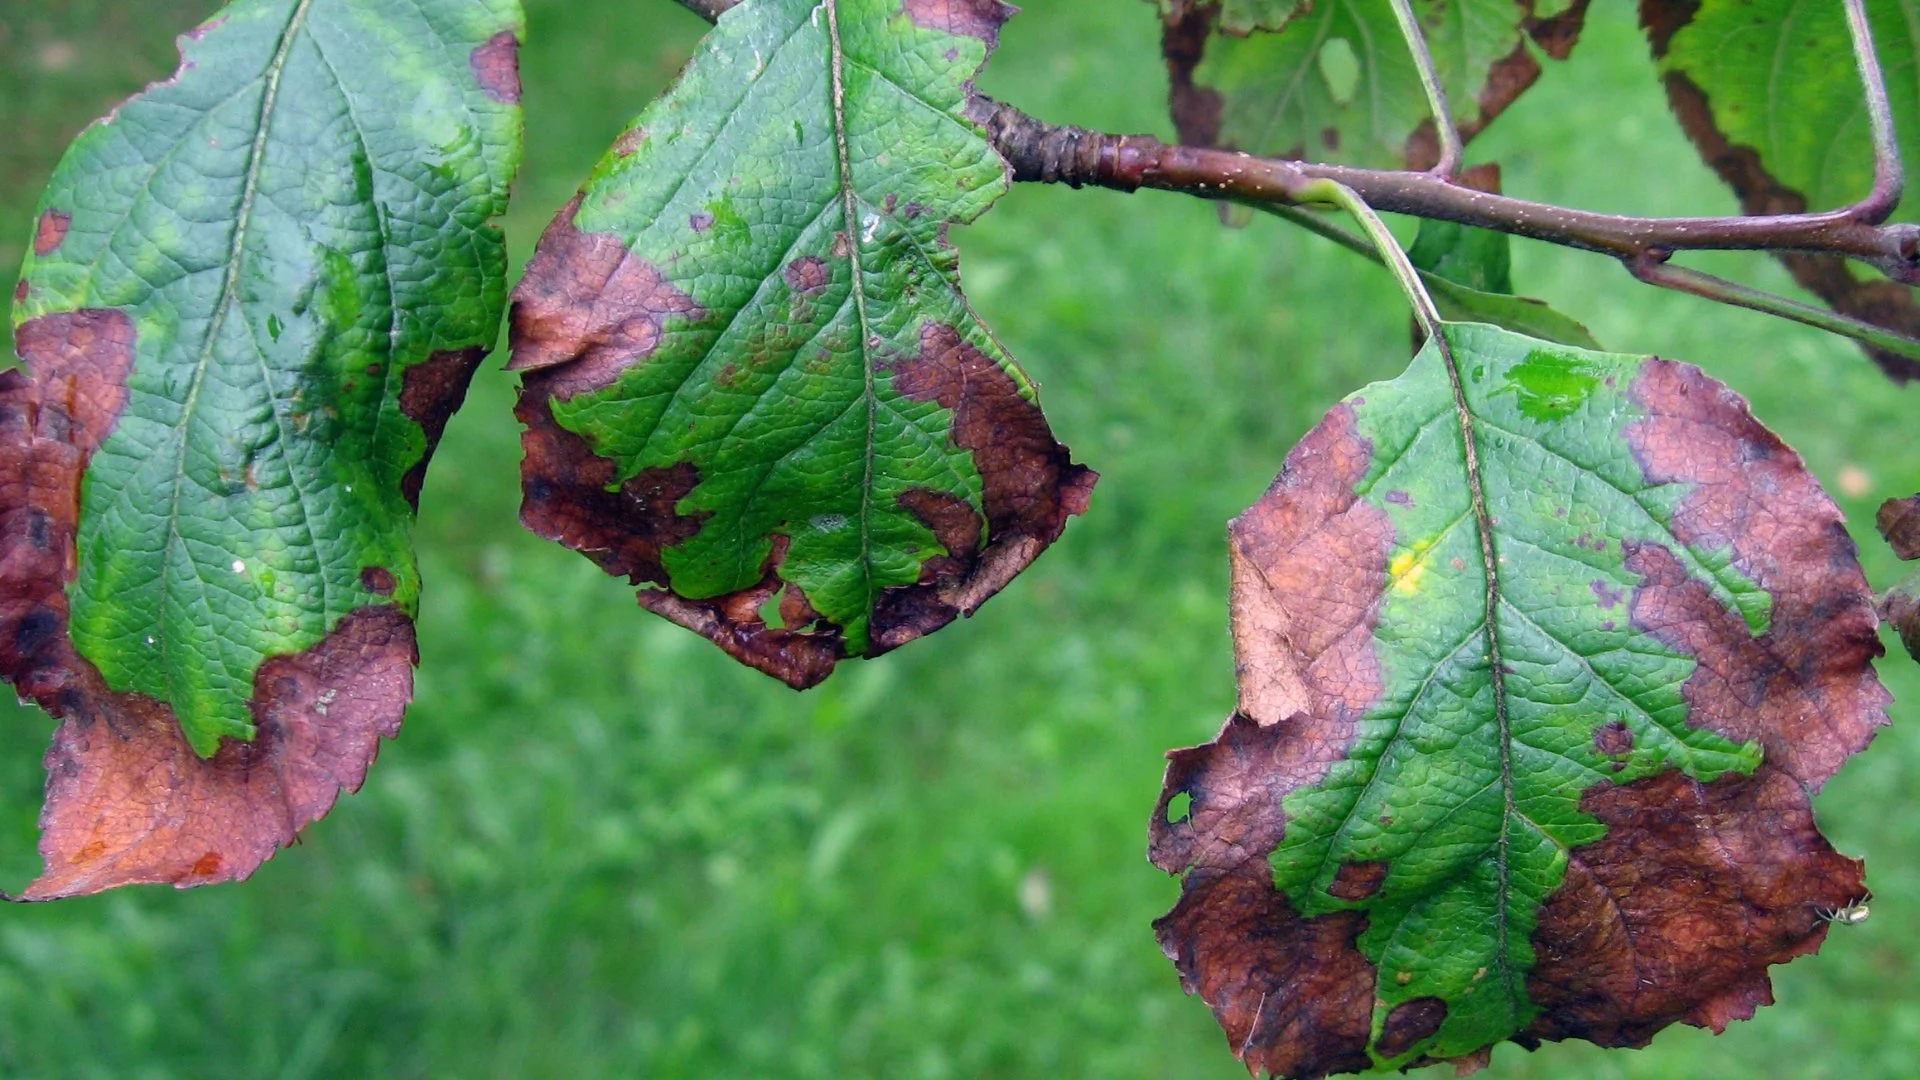 Is Your Tree Battling Cercospora Leaf Spot? How to Tell & What to Do